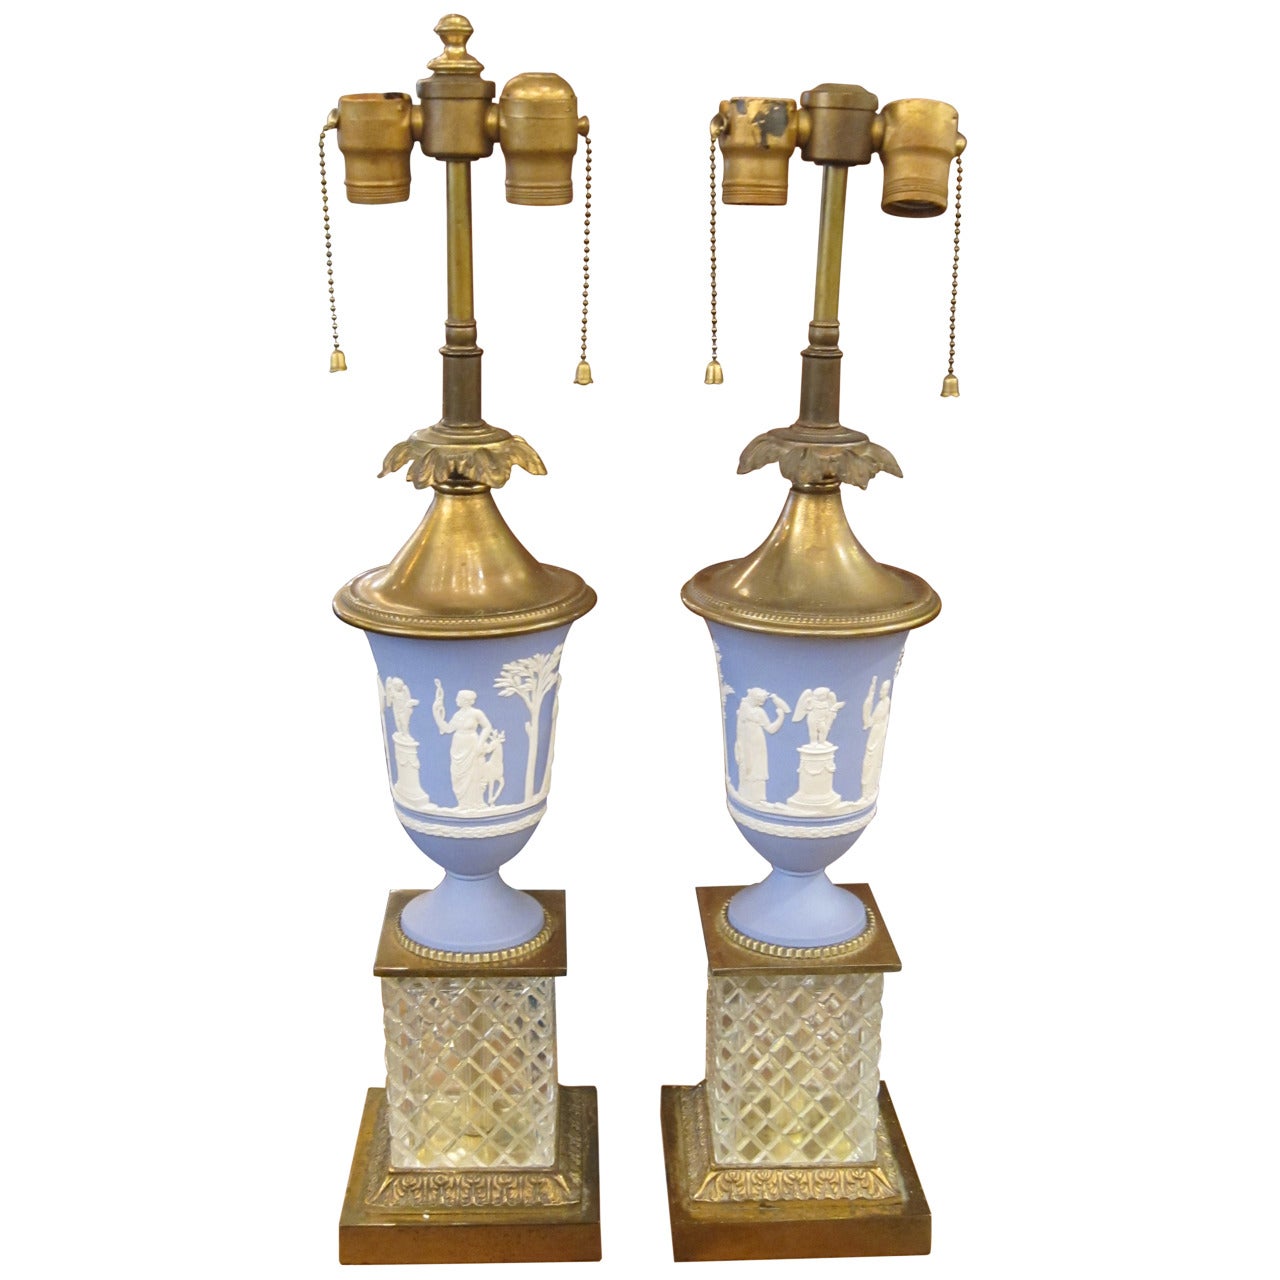 1920s Pair of English Made Wedgewood Table Lamps with Cut Crystal Bases